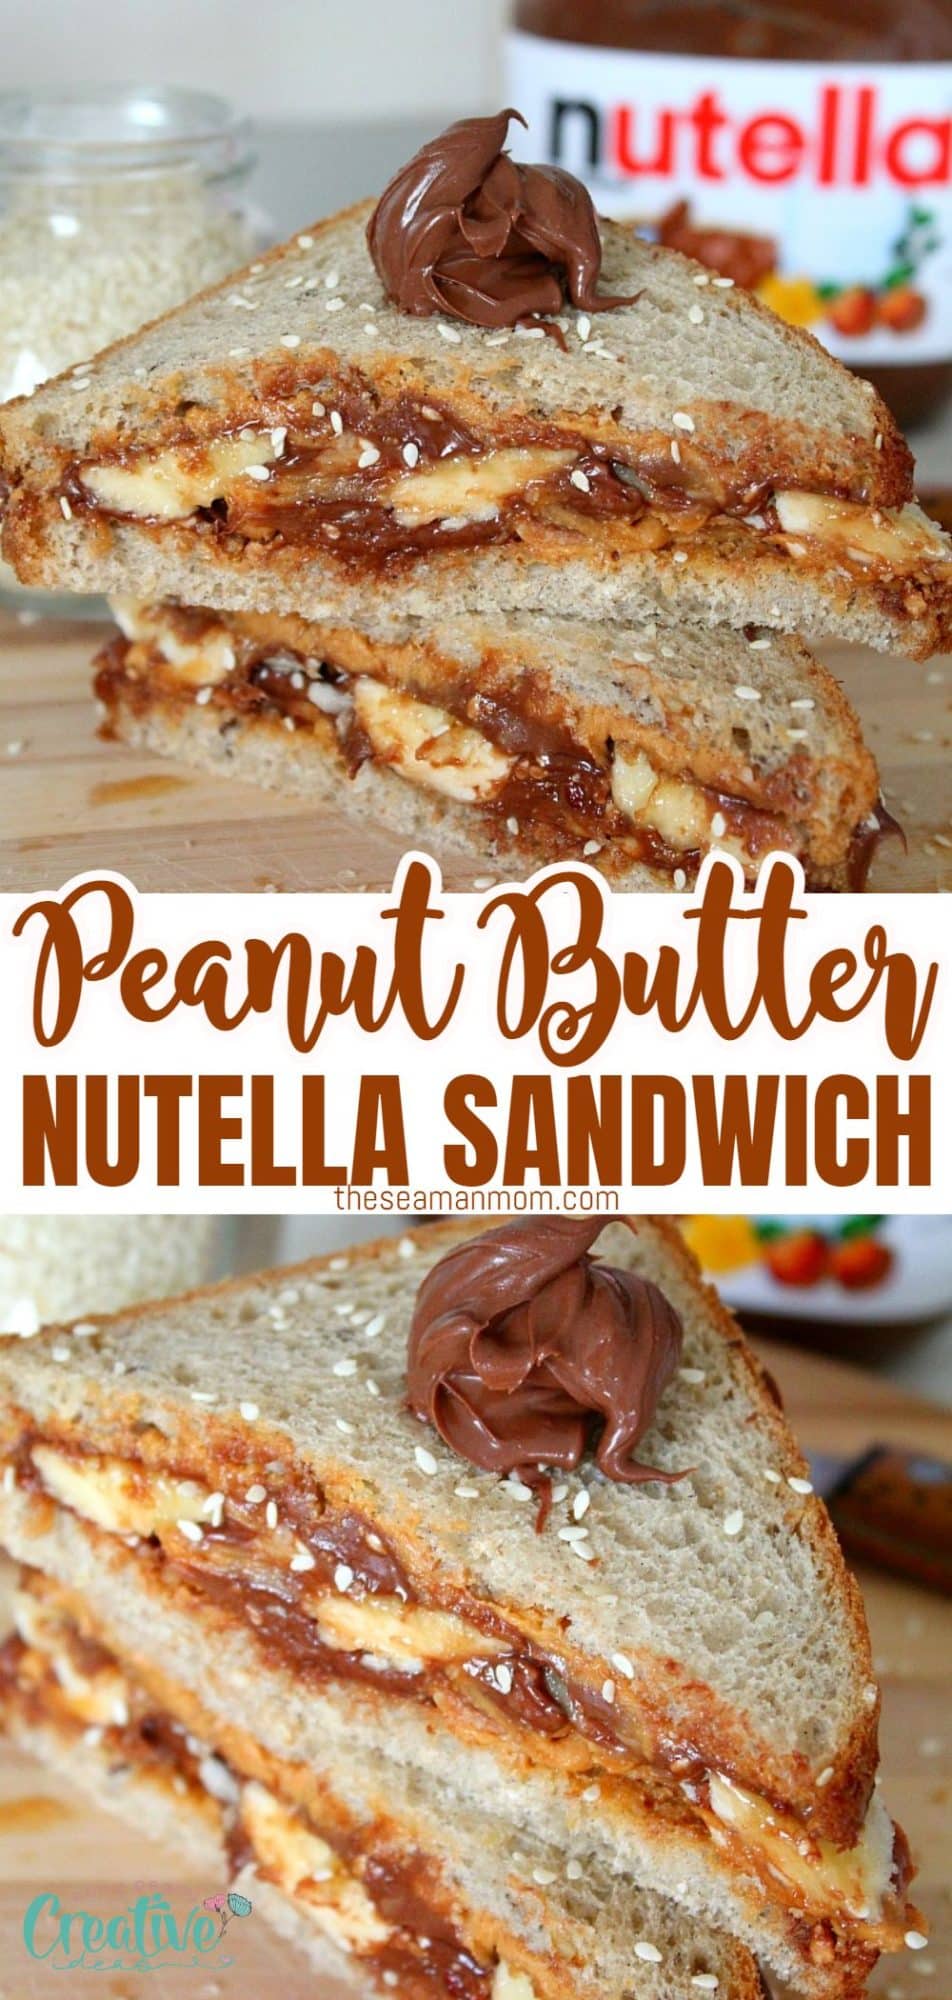 Peanut butter and Nutella sandwich